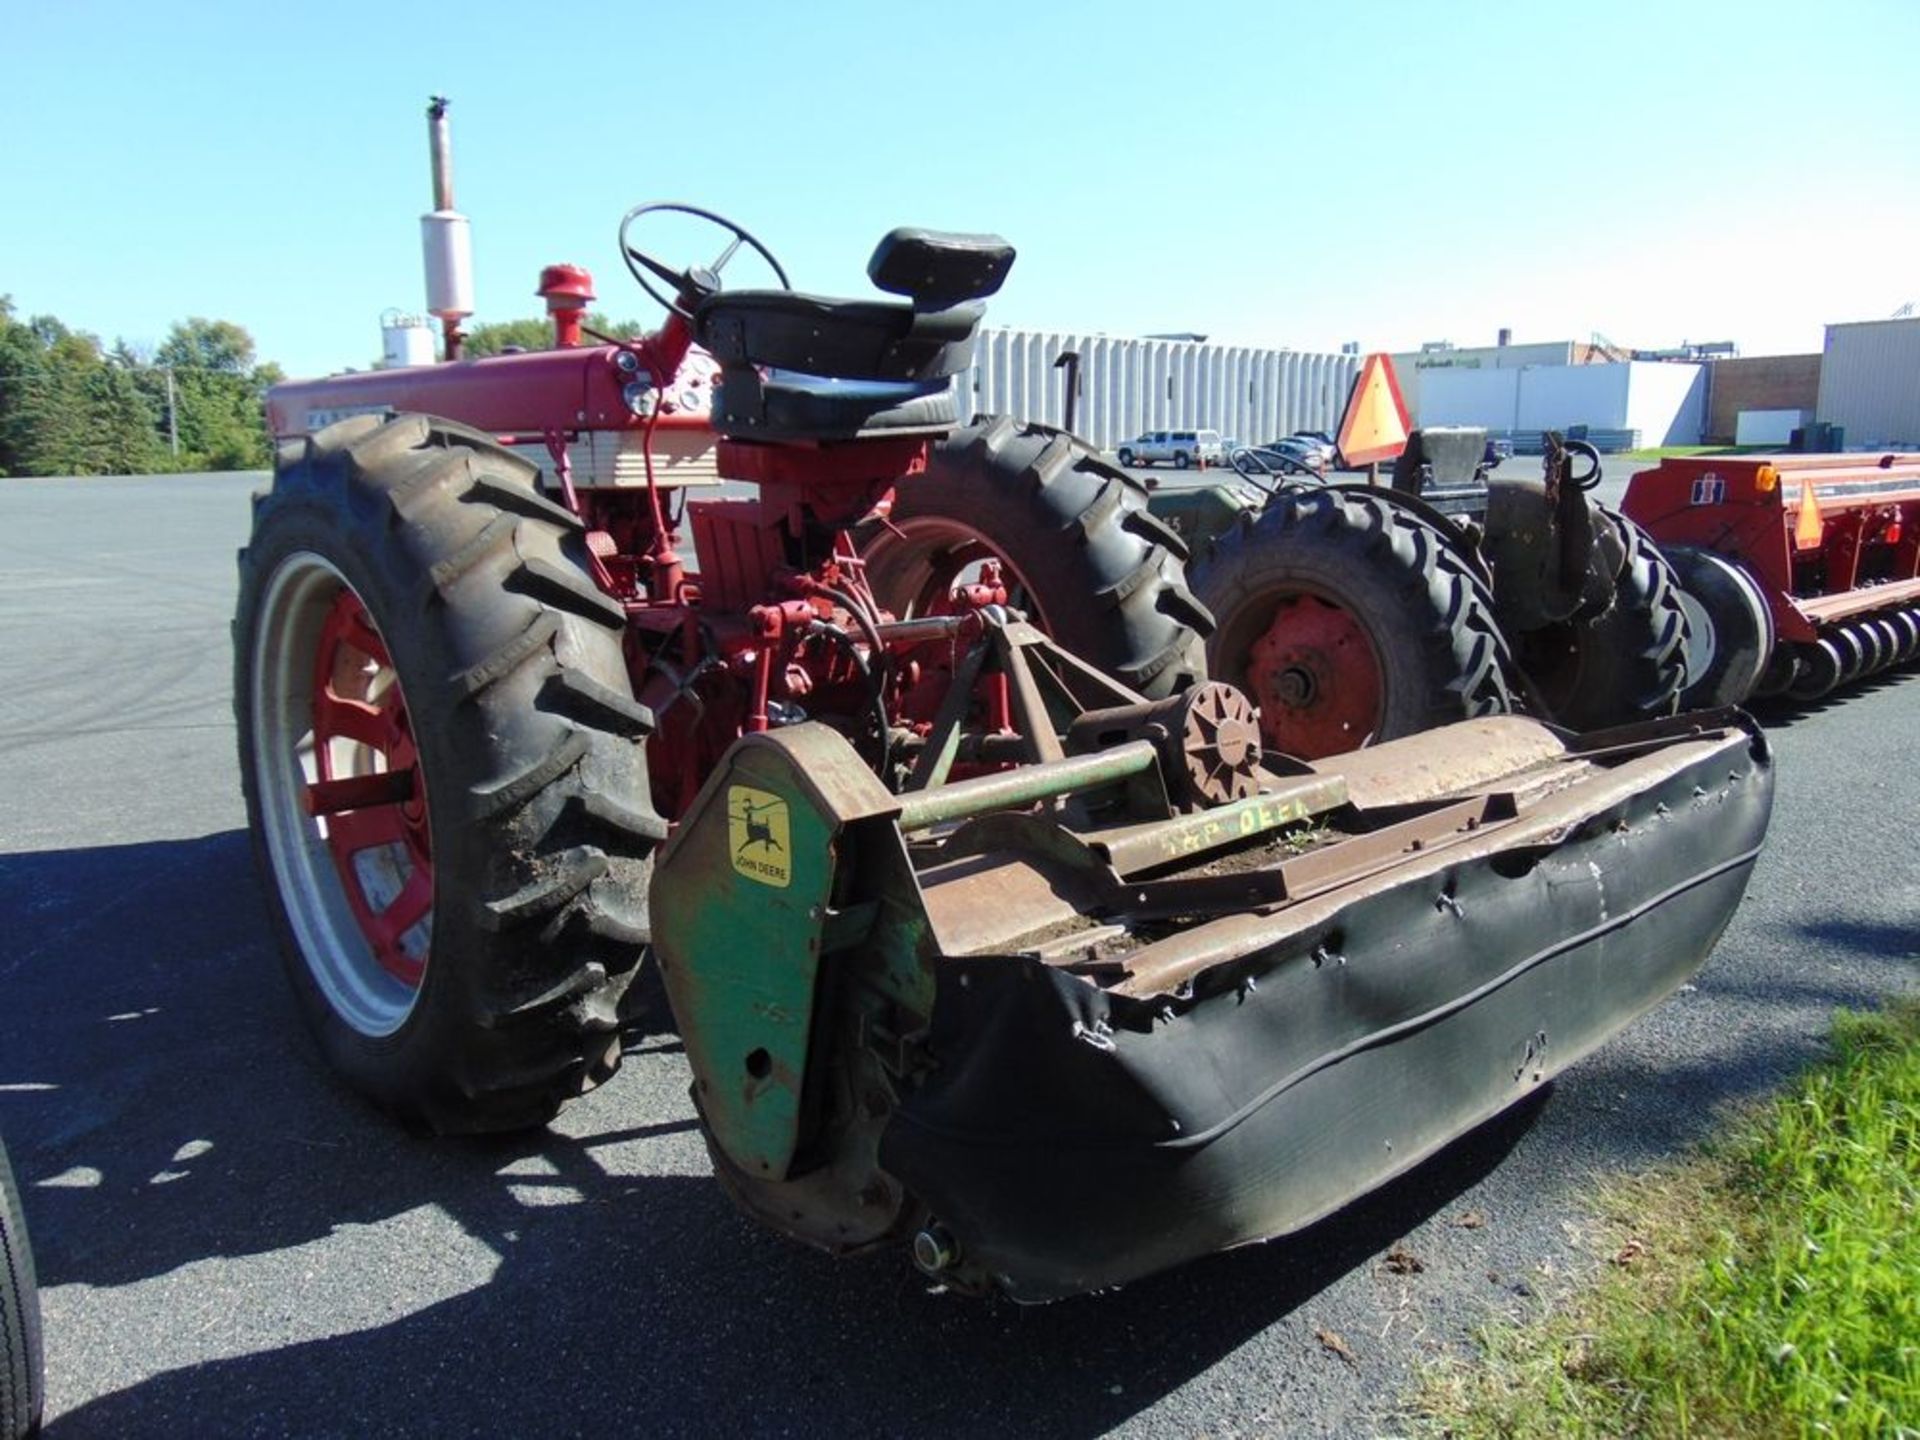 Farm All mod. 5600 Tractor w/ Mower, Gas-Powered - Image 2 of 2